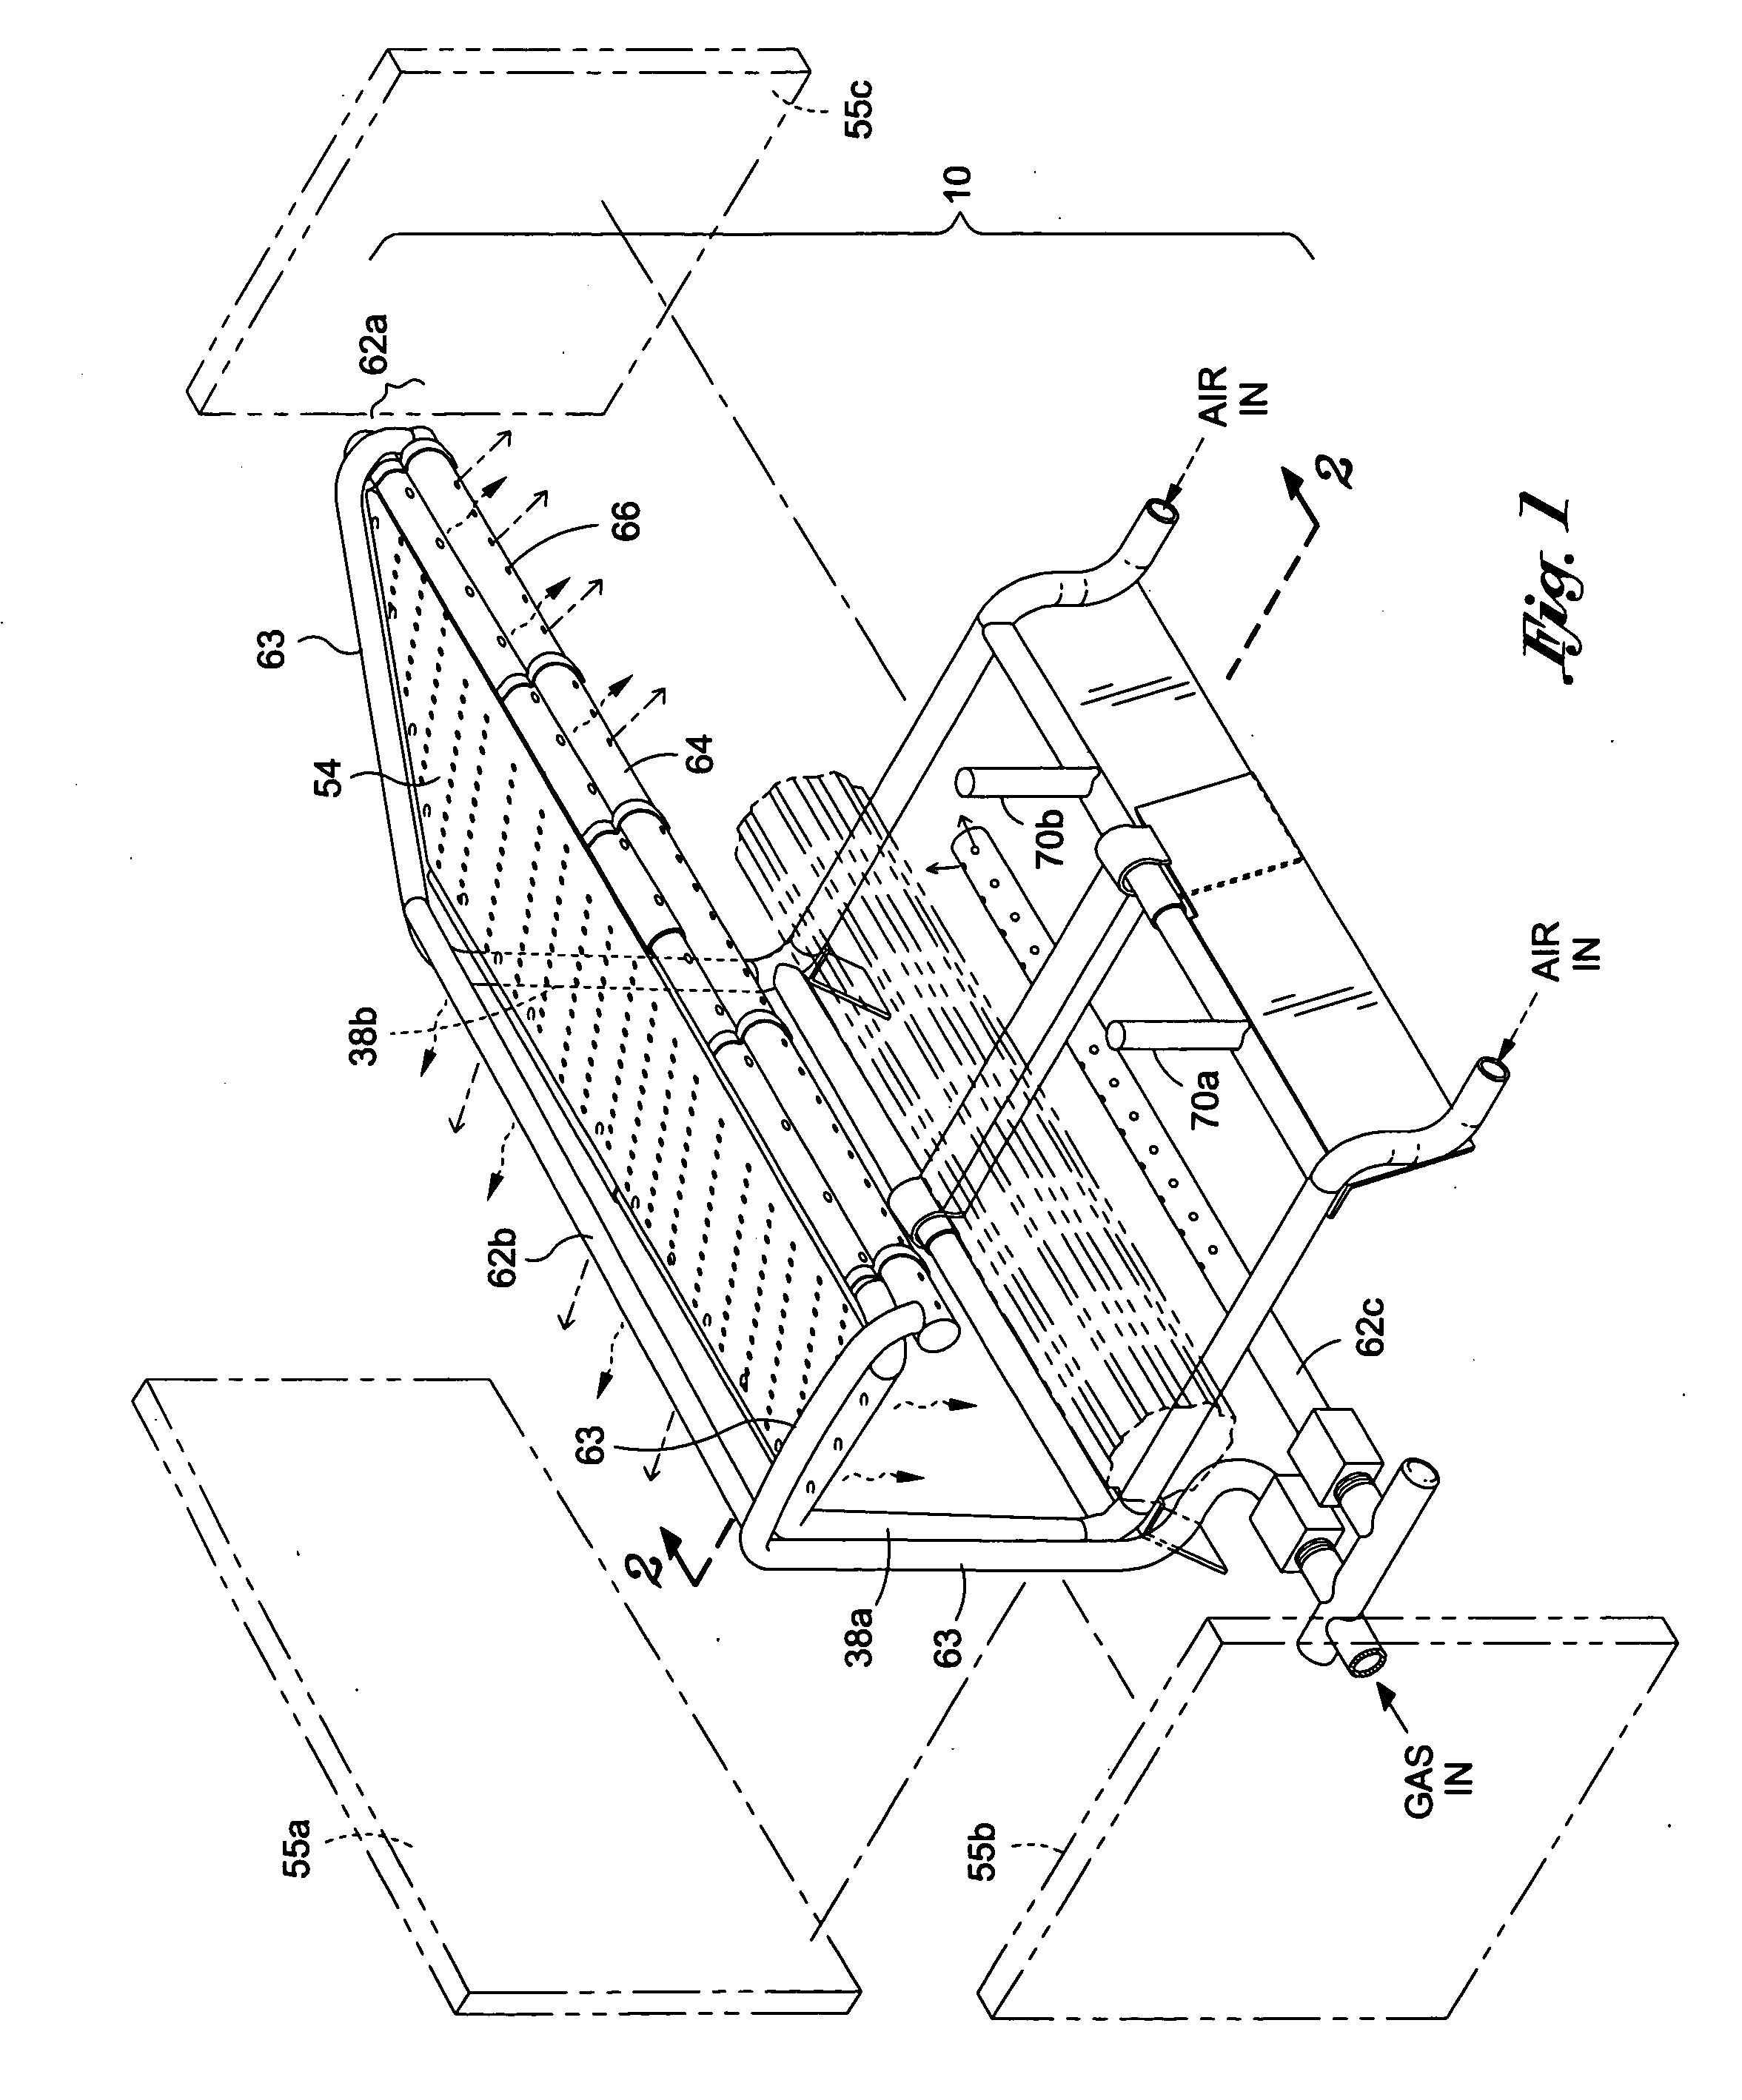 Fire Grate for Enhanced Combustion